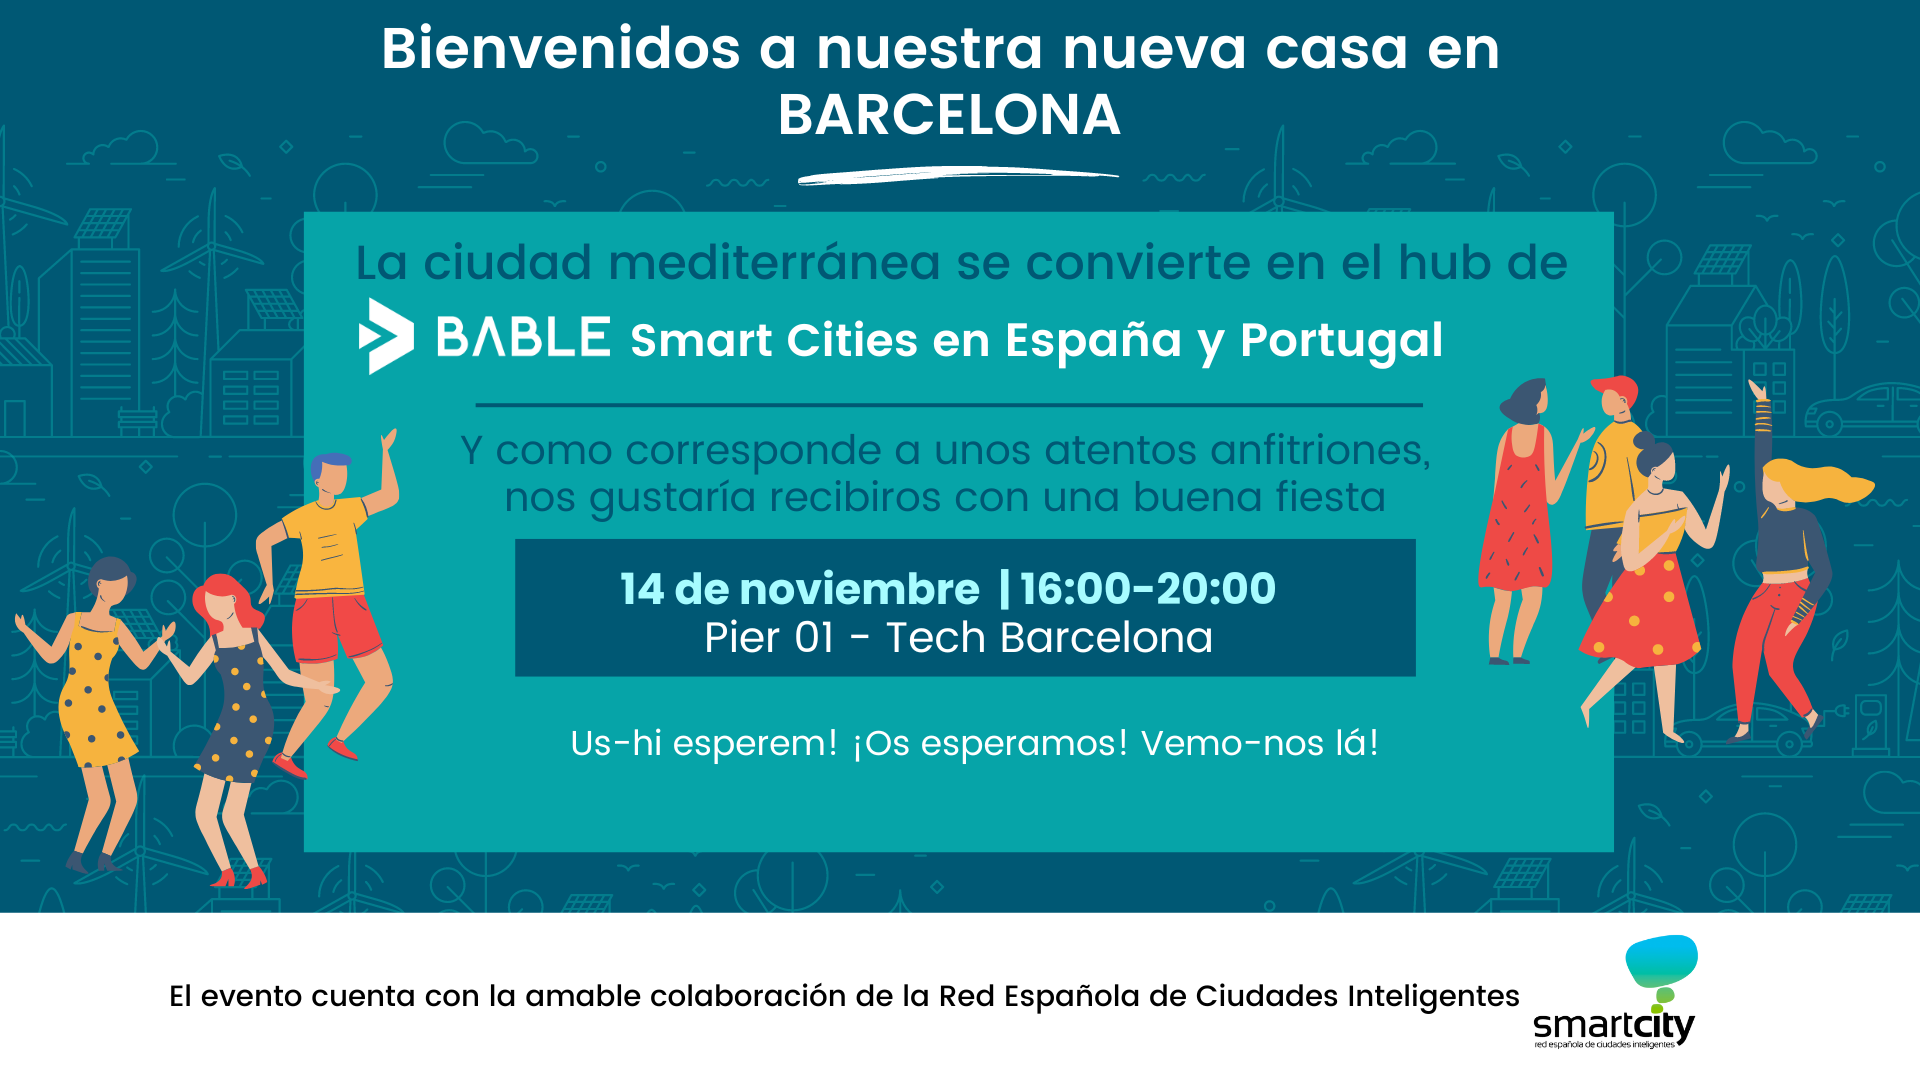 Launch event: BABLE Smart Cities in Iberia